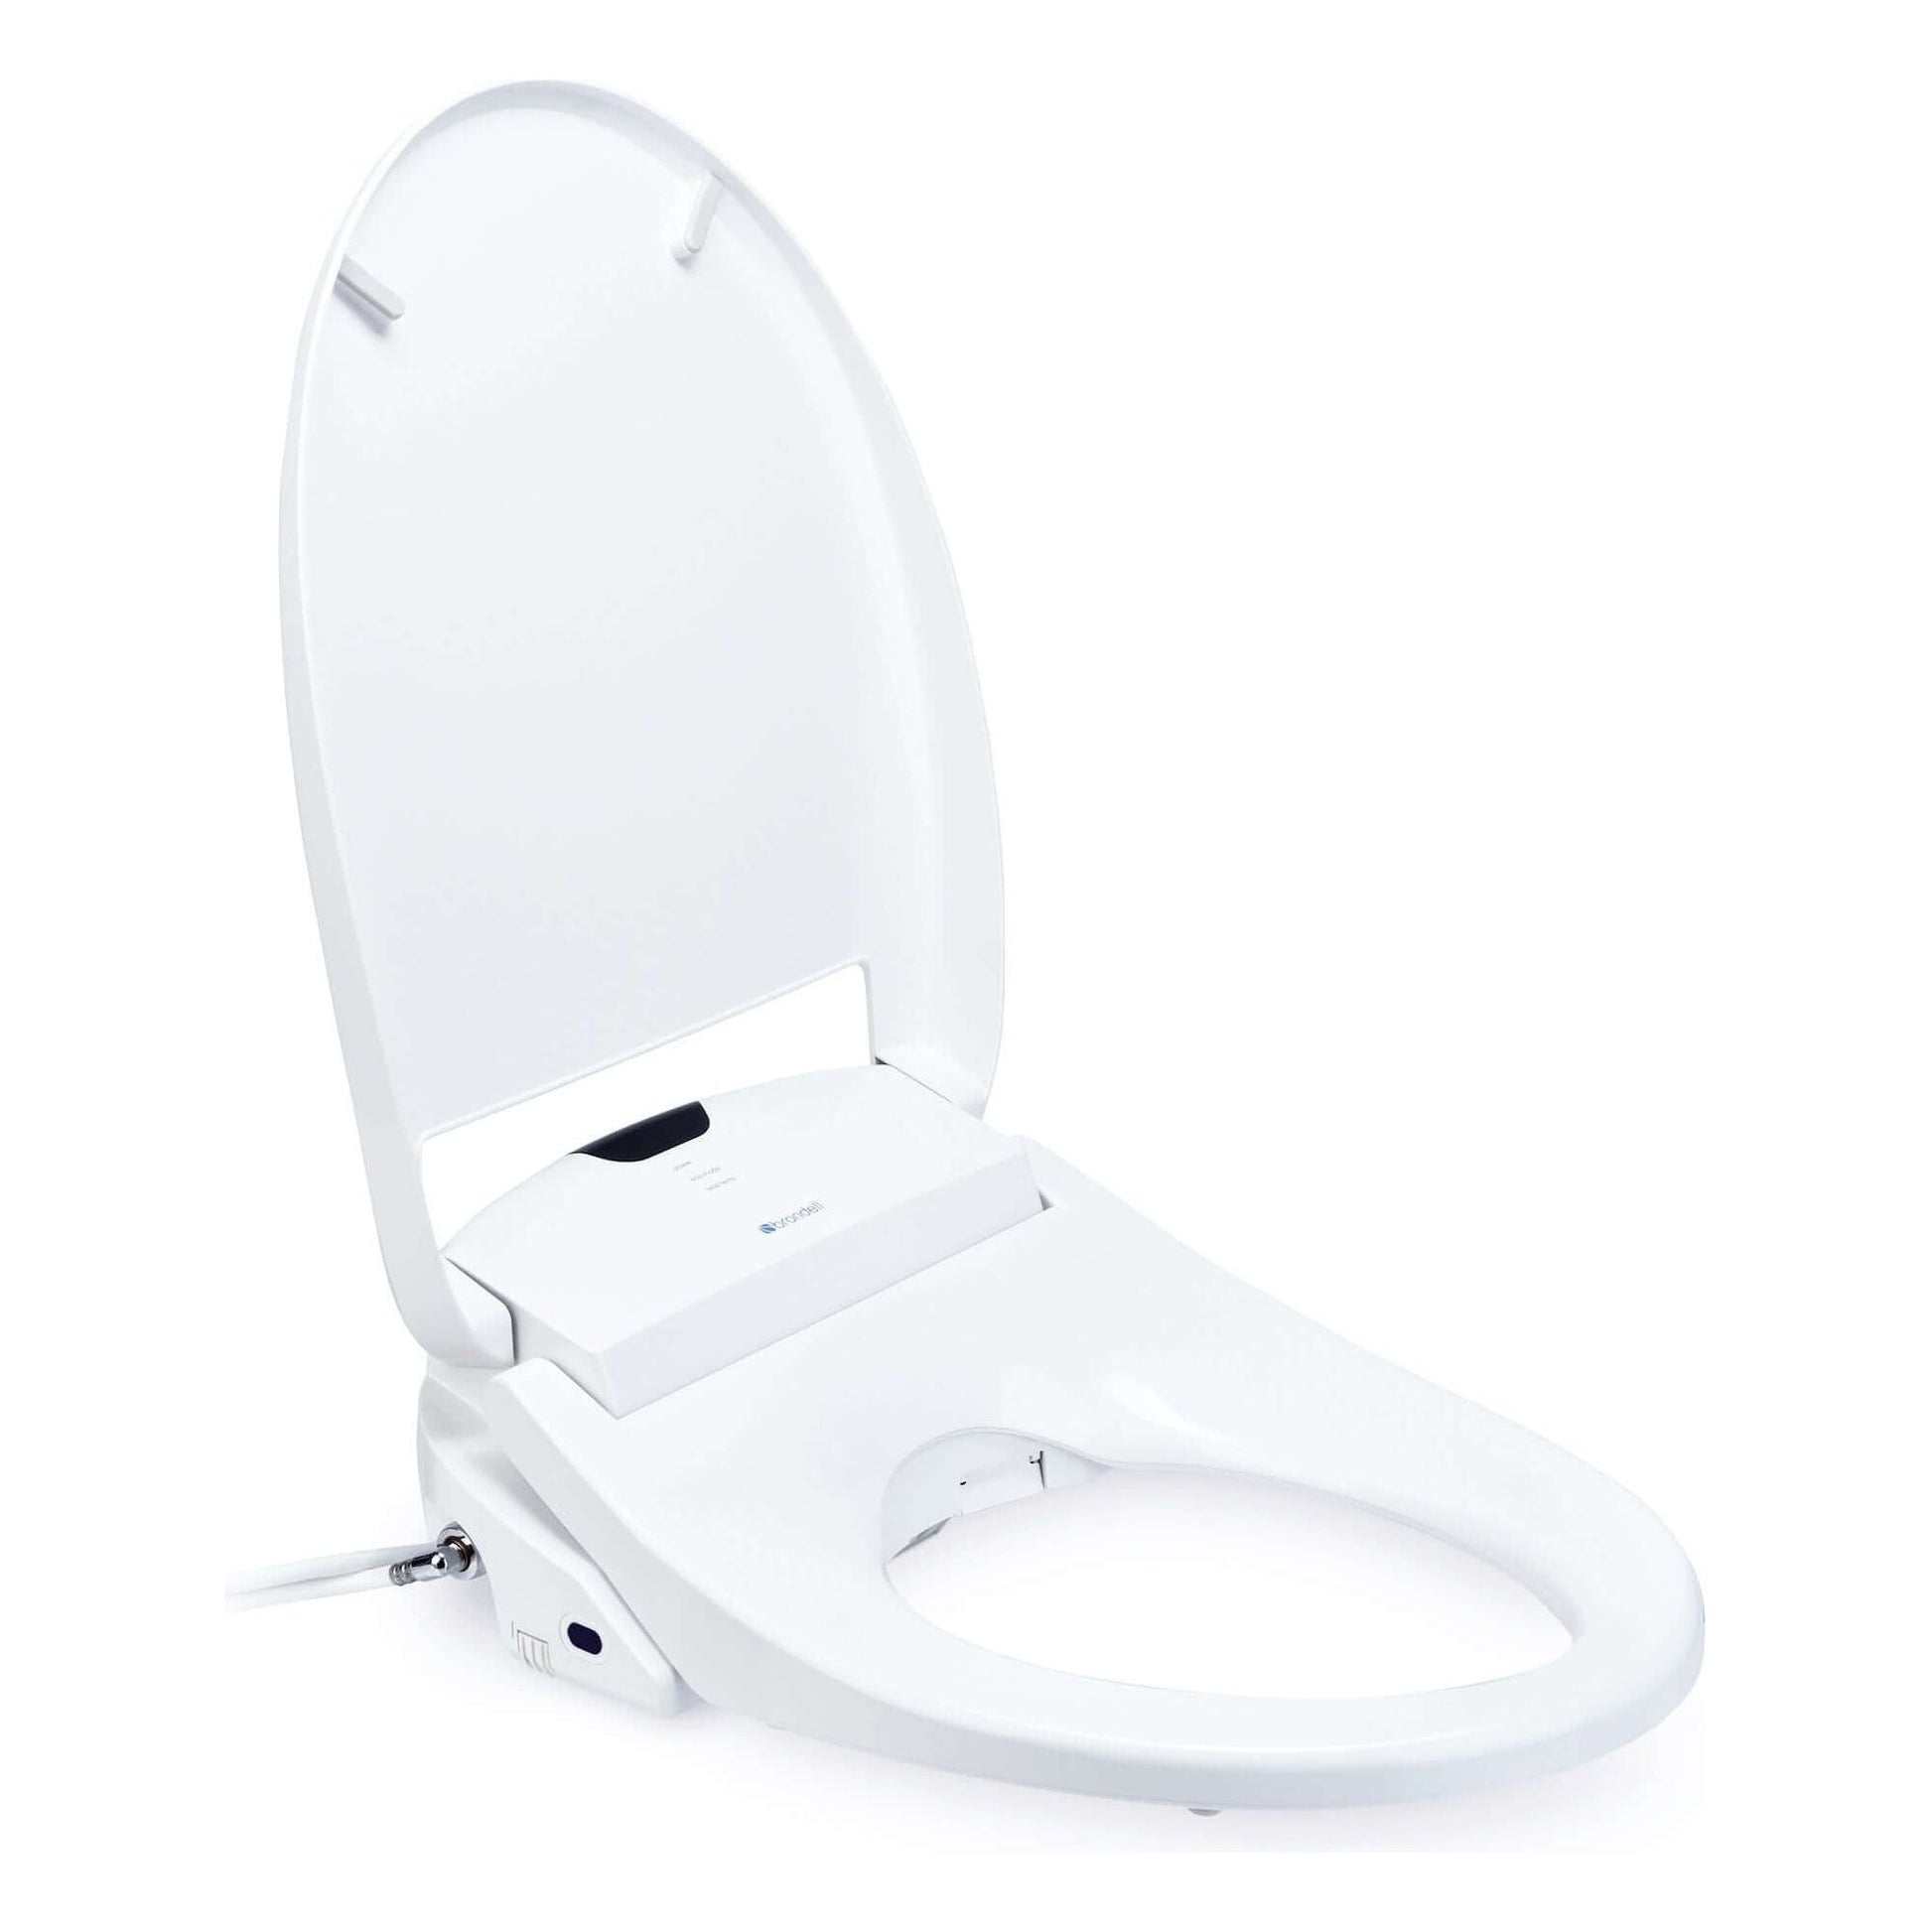 Swash 1400 Bidet Seat - side angled view with lid open